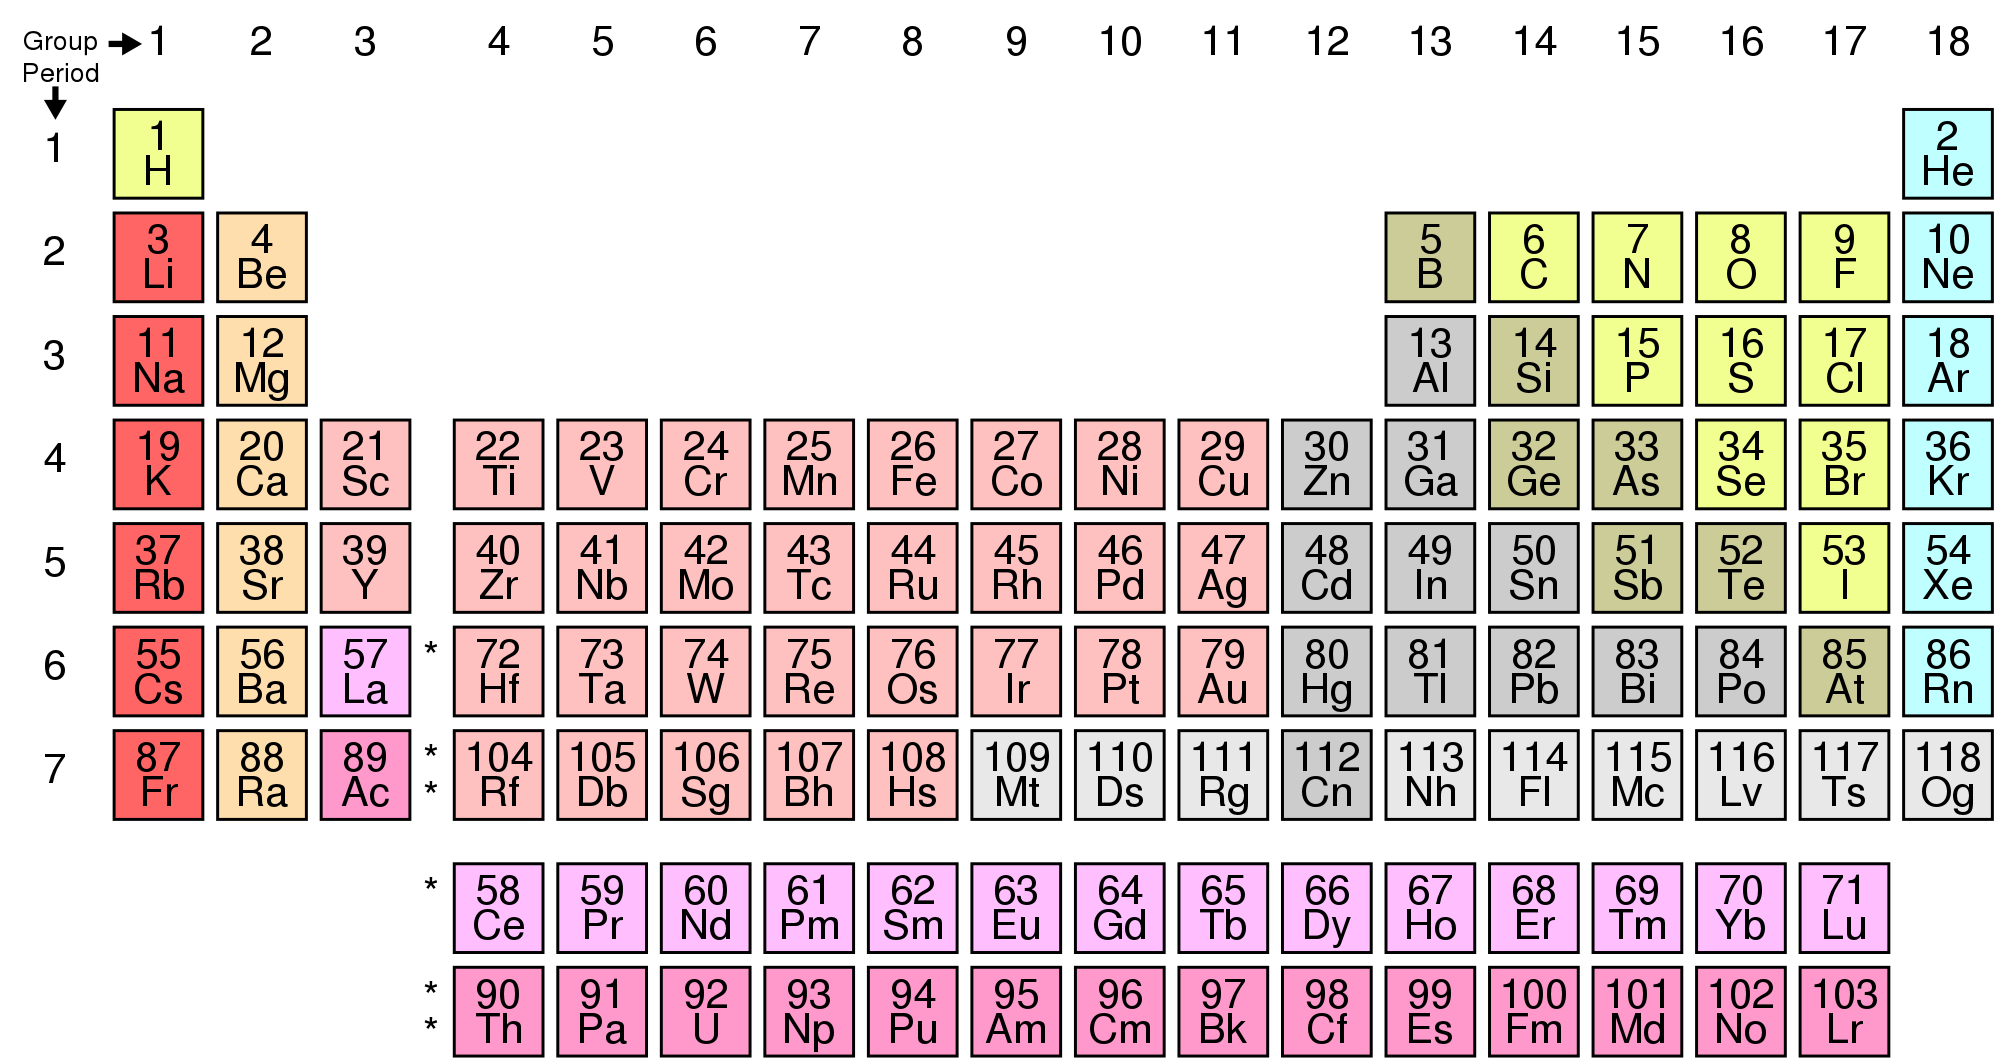 Image shows the periodic table of the elements.